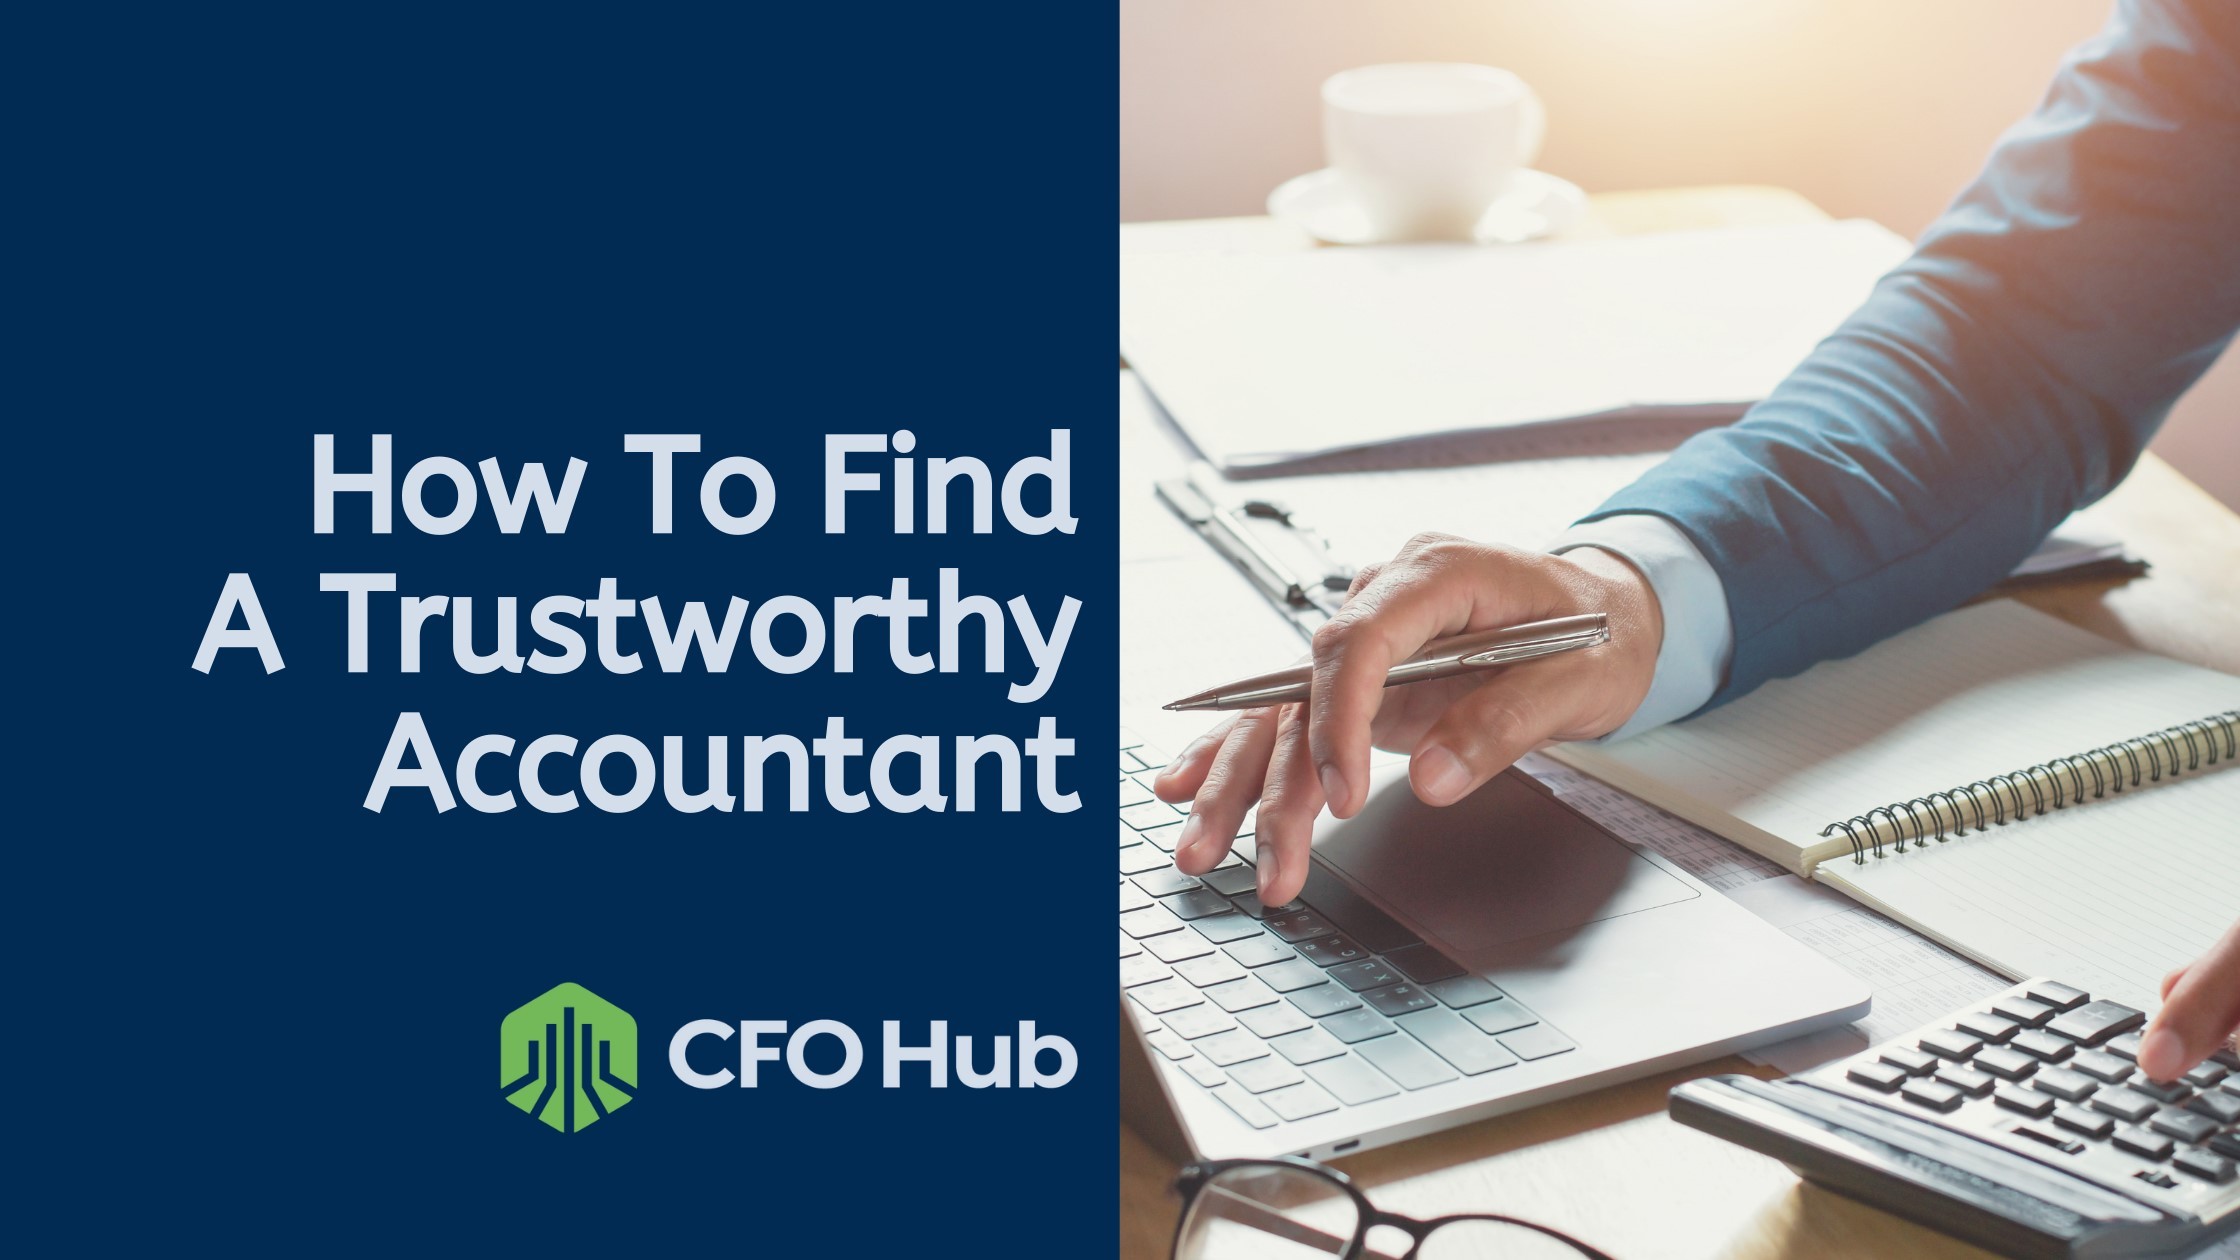 How to find a trustworthy accountant